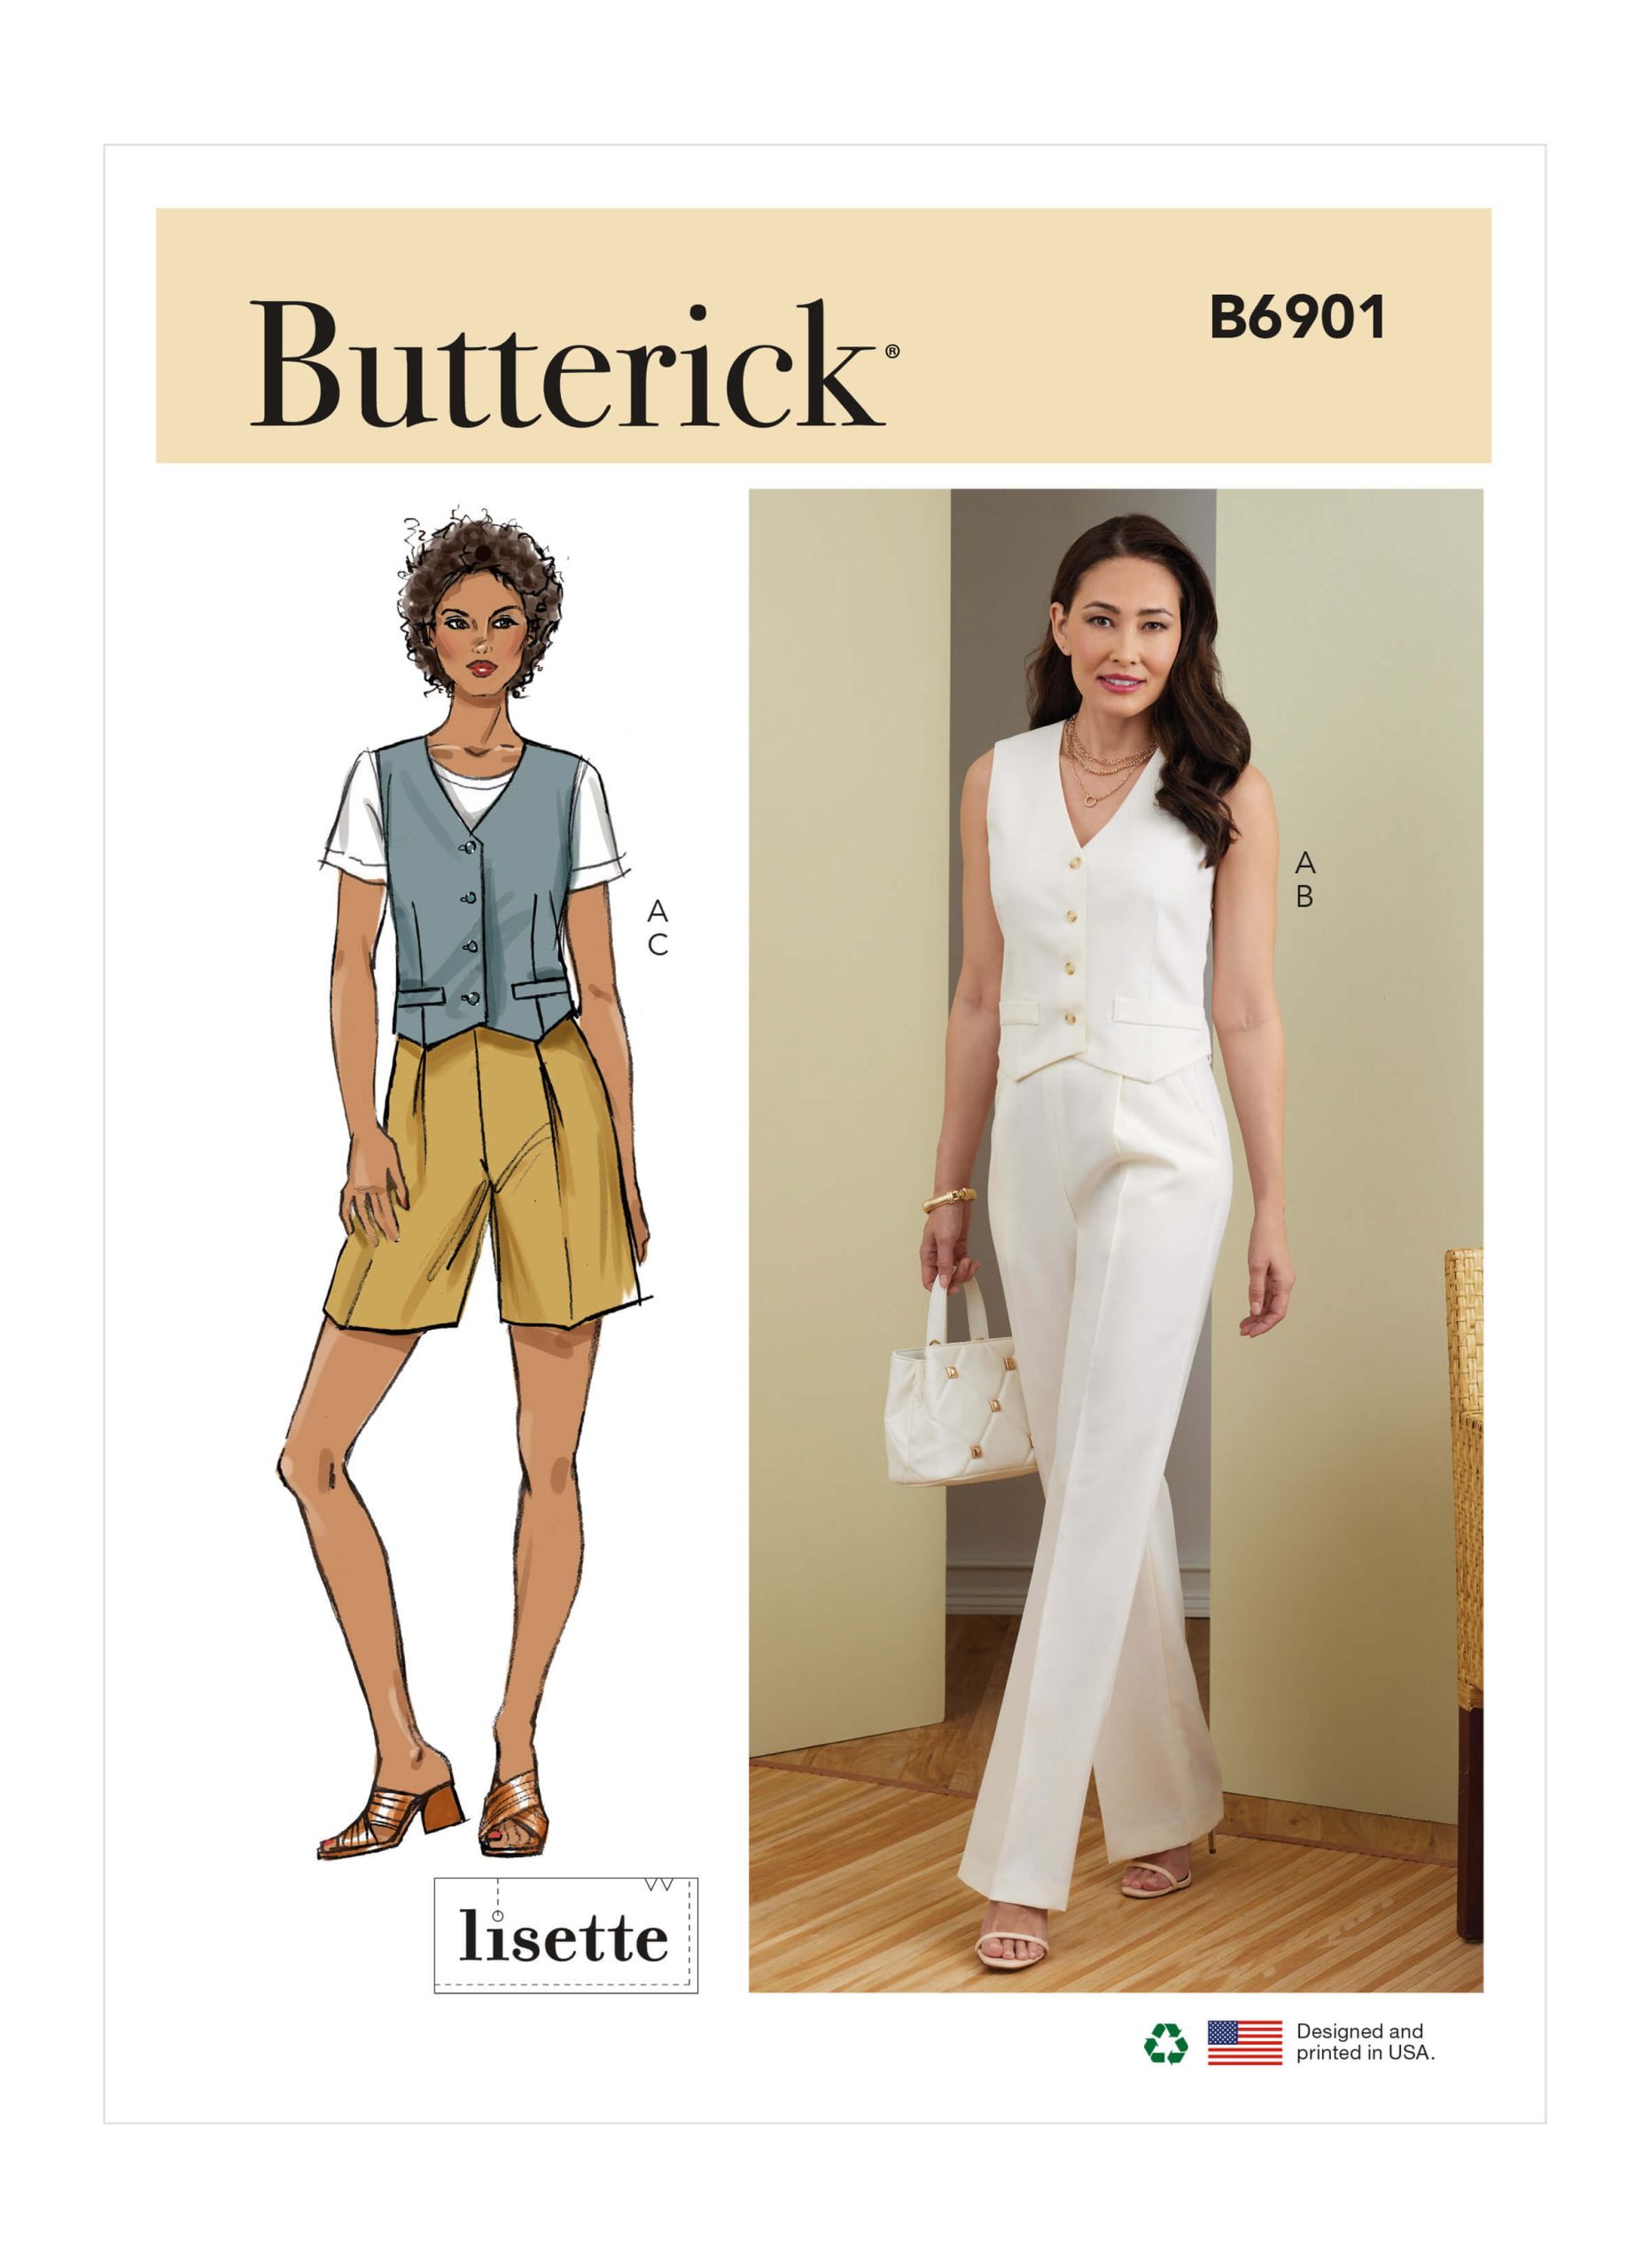 Butterick Sewing Pattern B6901 Lisette Misses' Waistcoat, Trousers and Shorts.